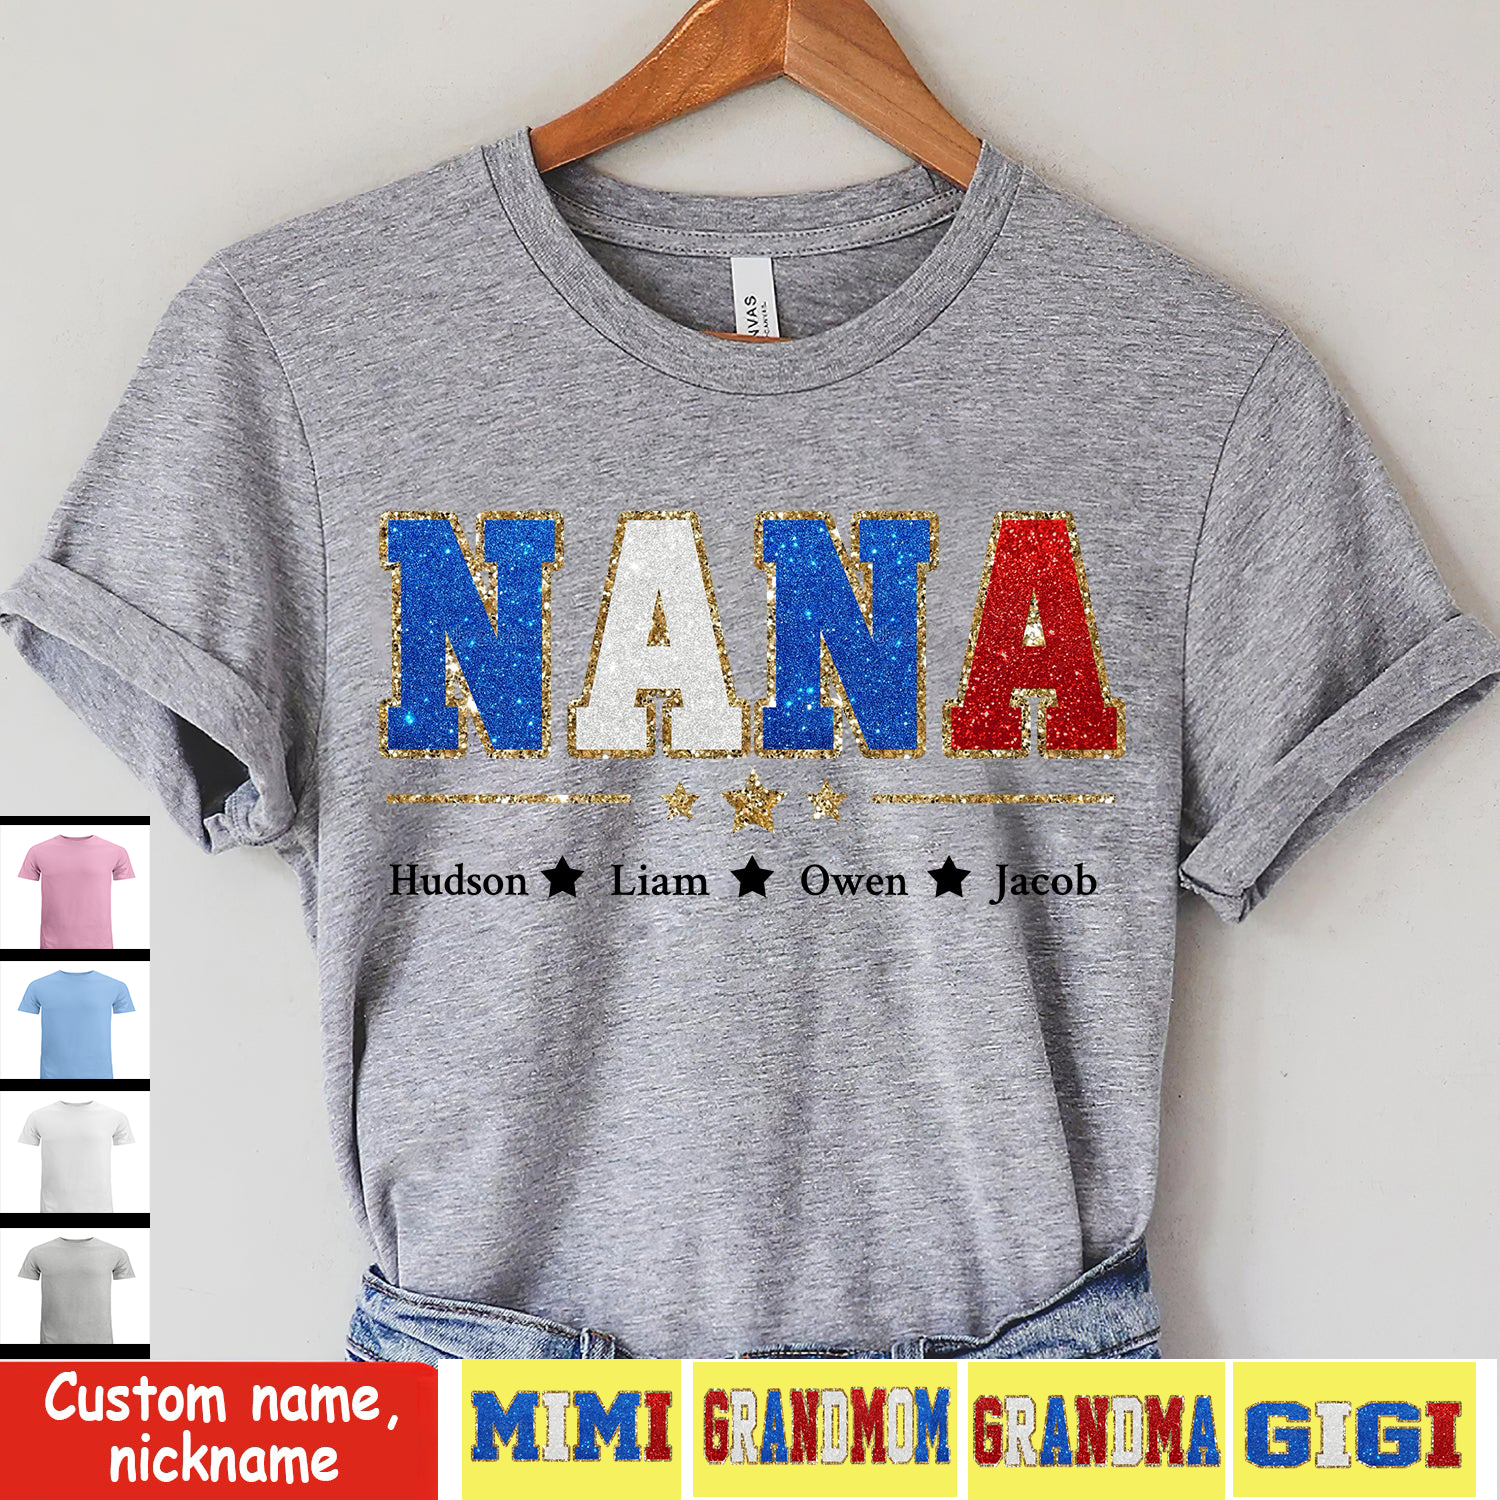 Personalized T-shirt and Perfect Gift for Grandmas Moms Aunties